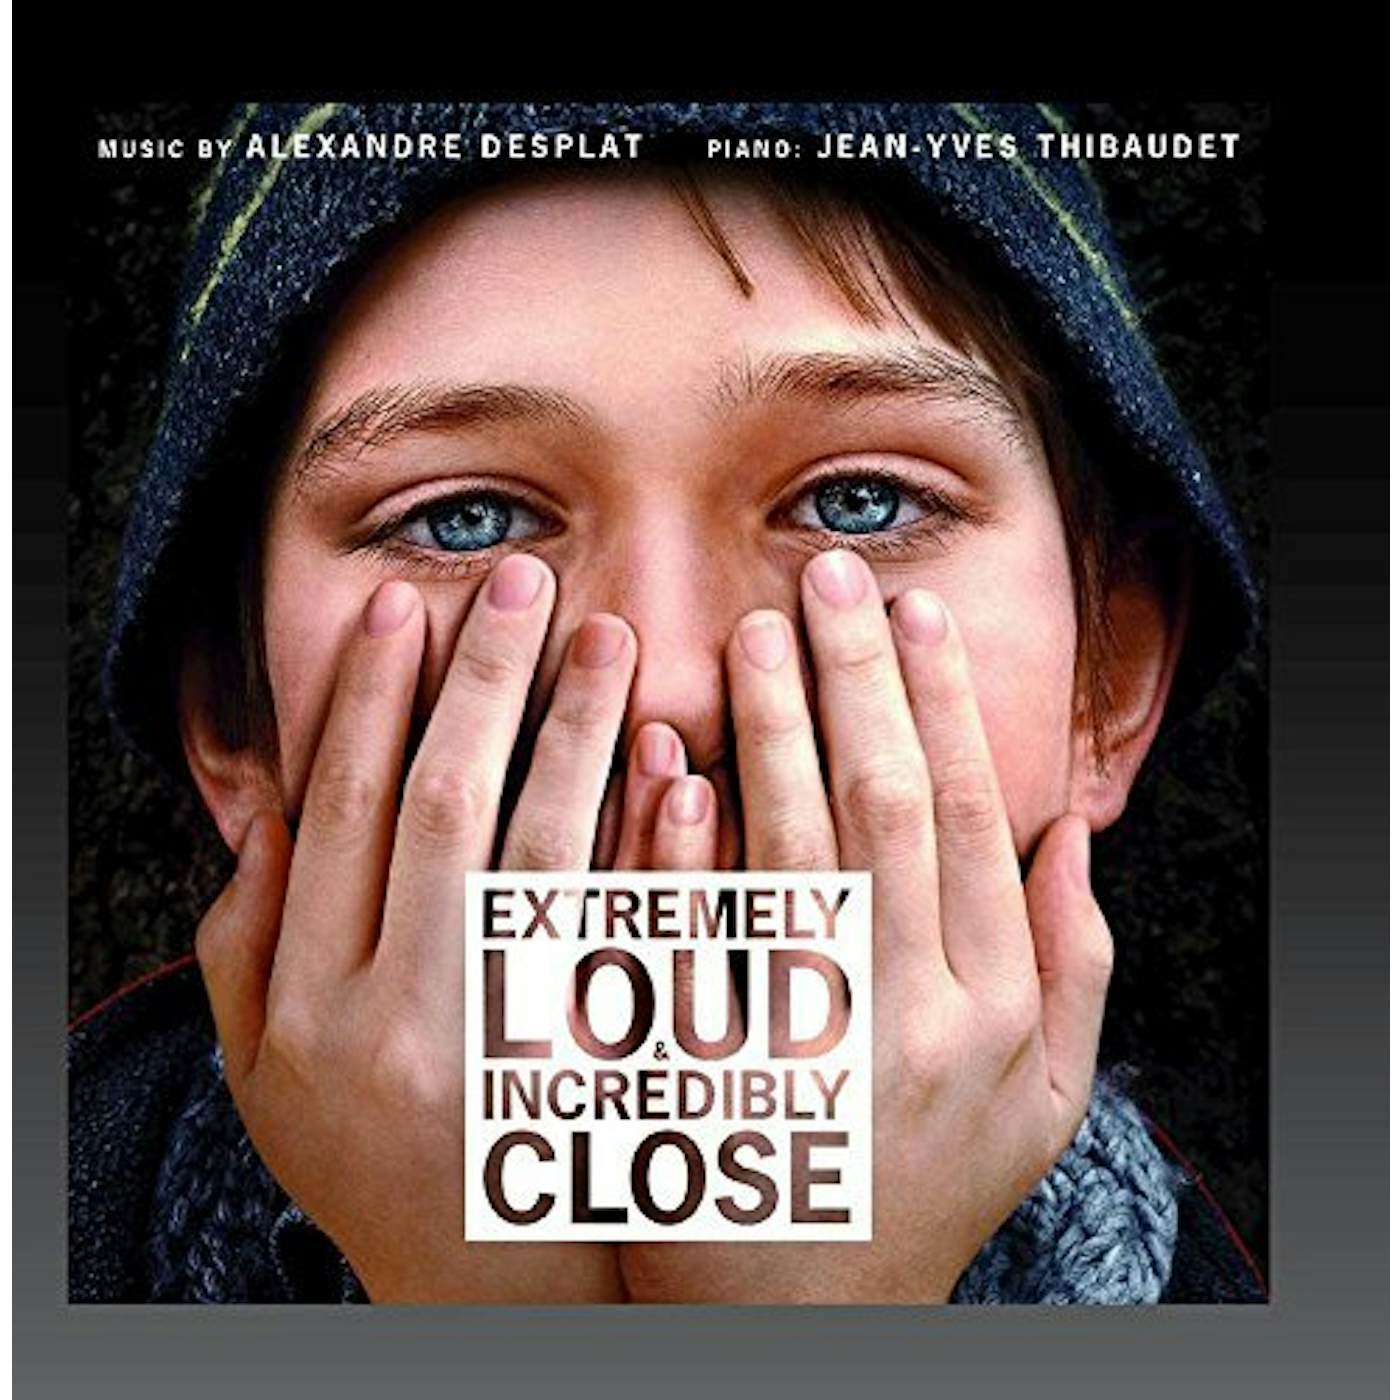 Alexandre Desplat EXTREMELY LOUD & INCREDIBLY CLOSE / O.S.T. CD